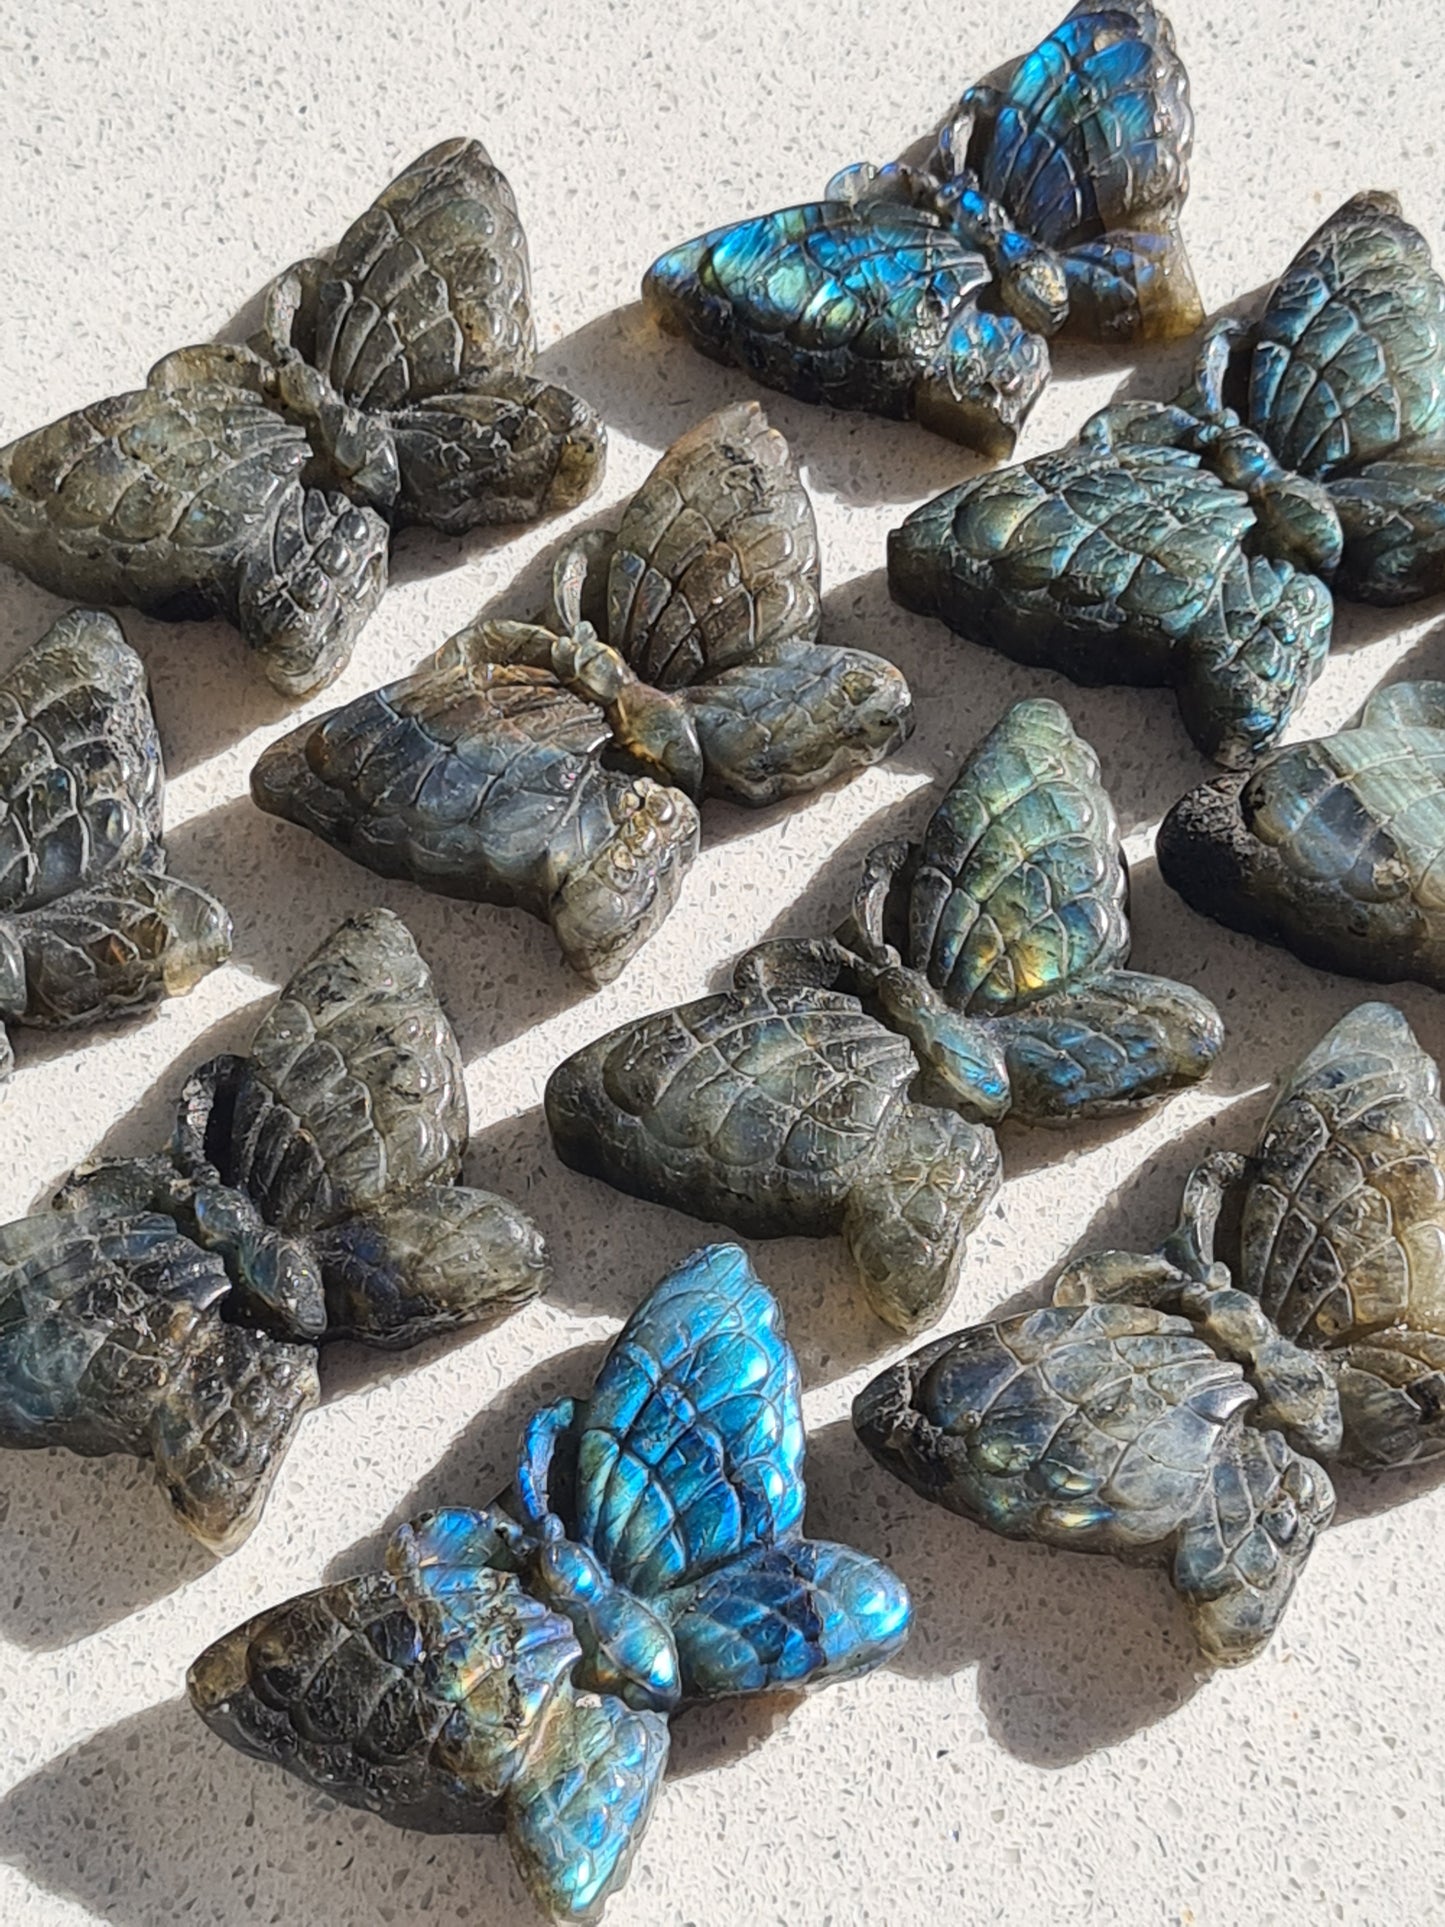 Collection of labradorite butterfly carvings, each with unique labradorescence